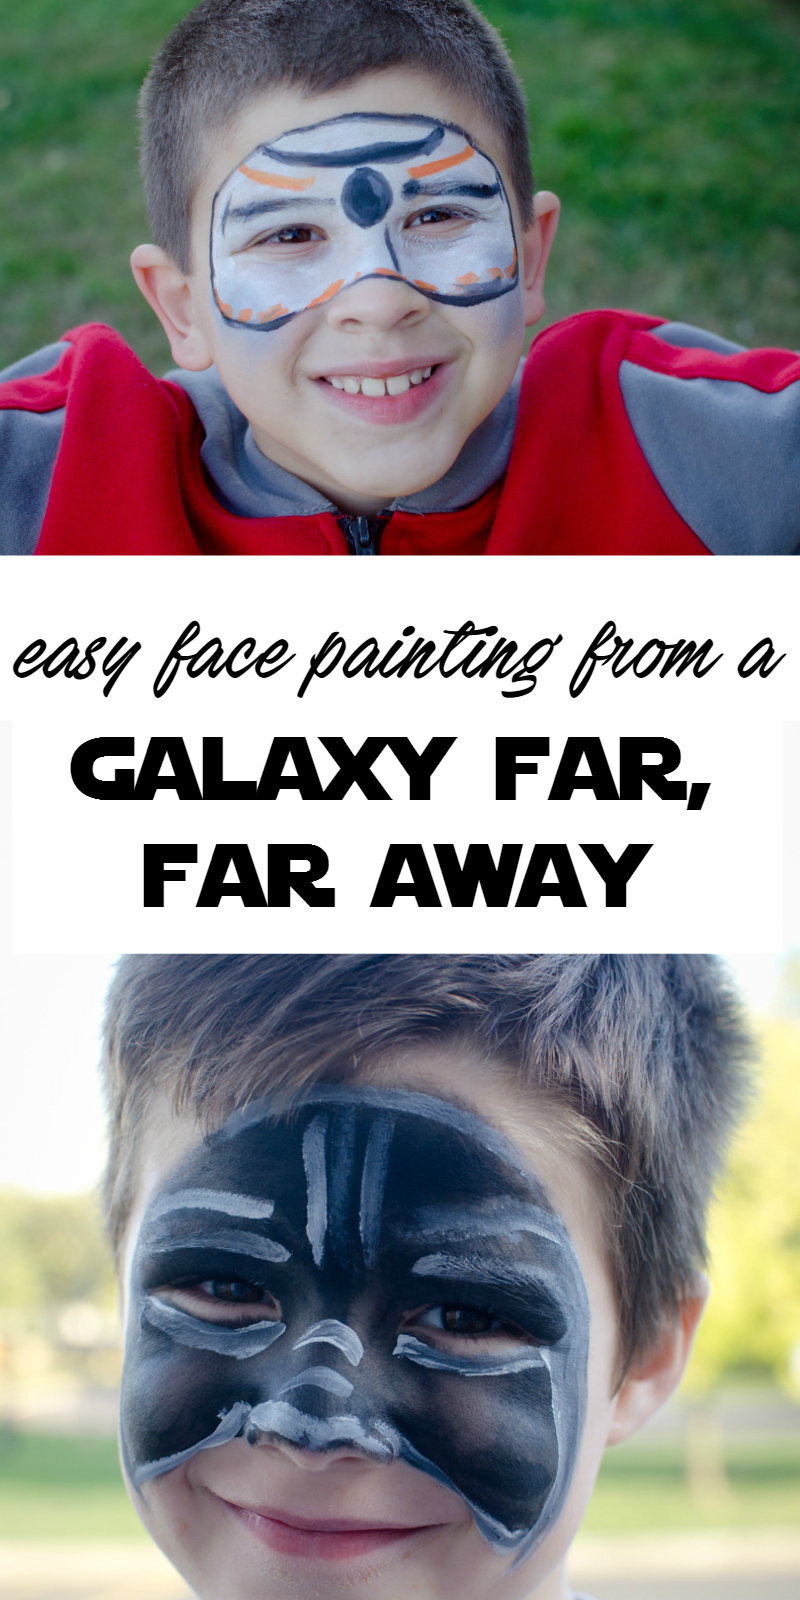 easy-face-painting-from-a-galaxy-far-far-away